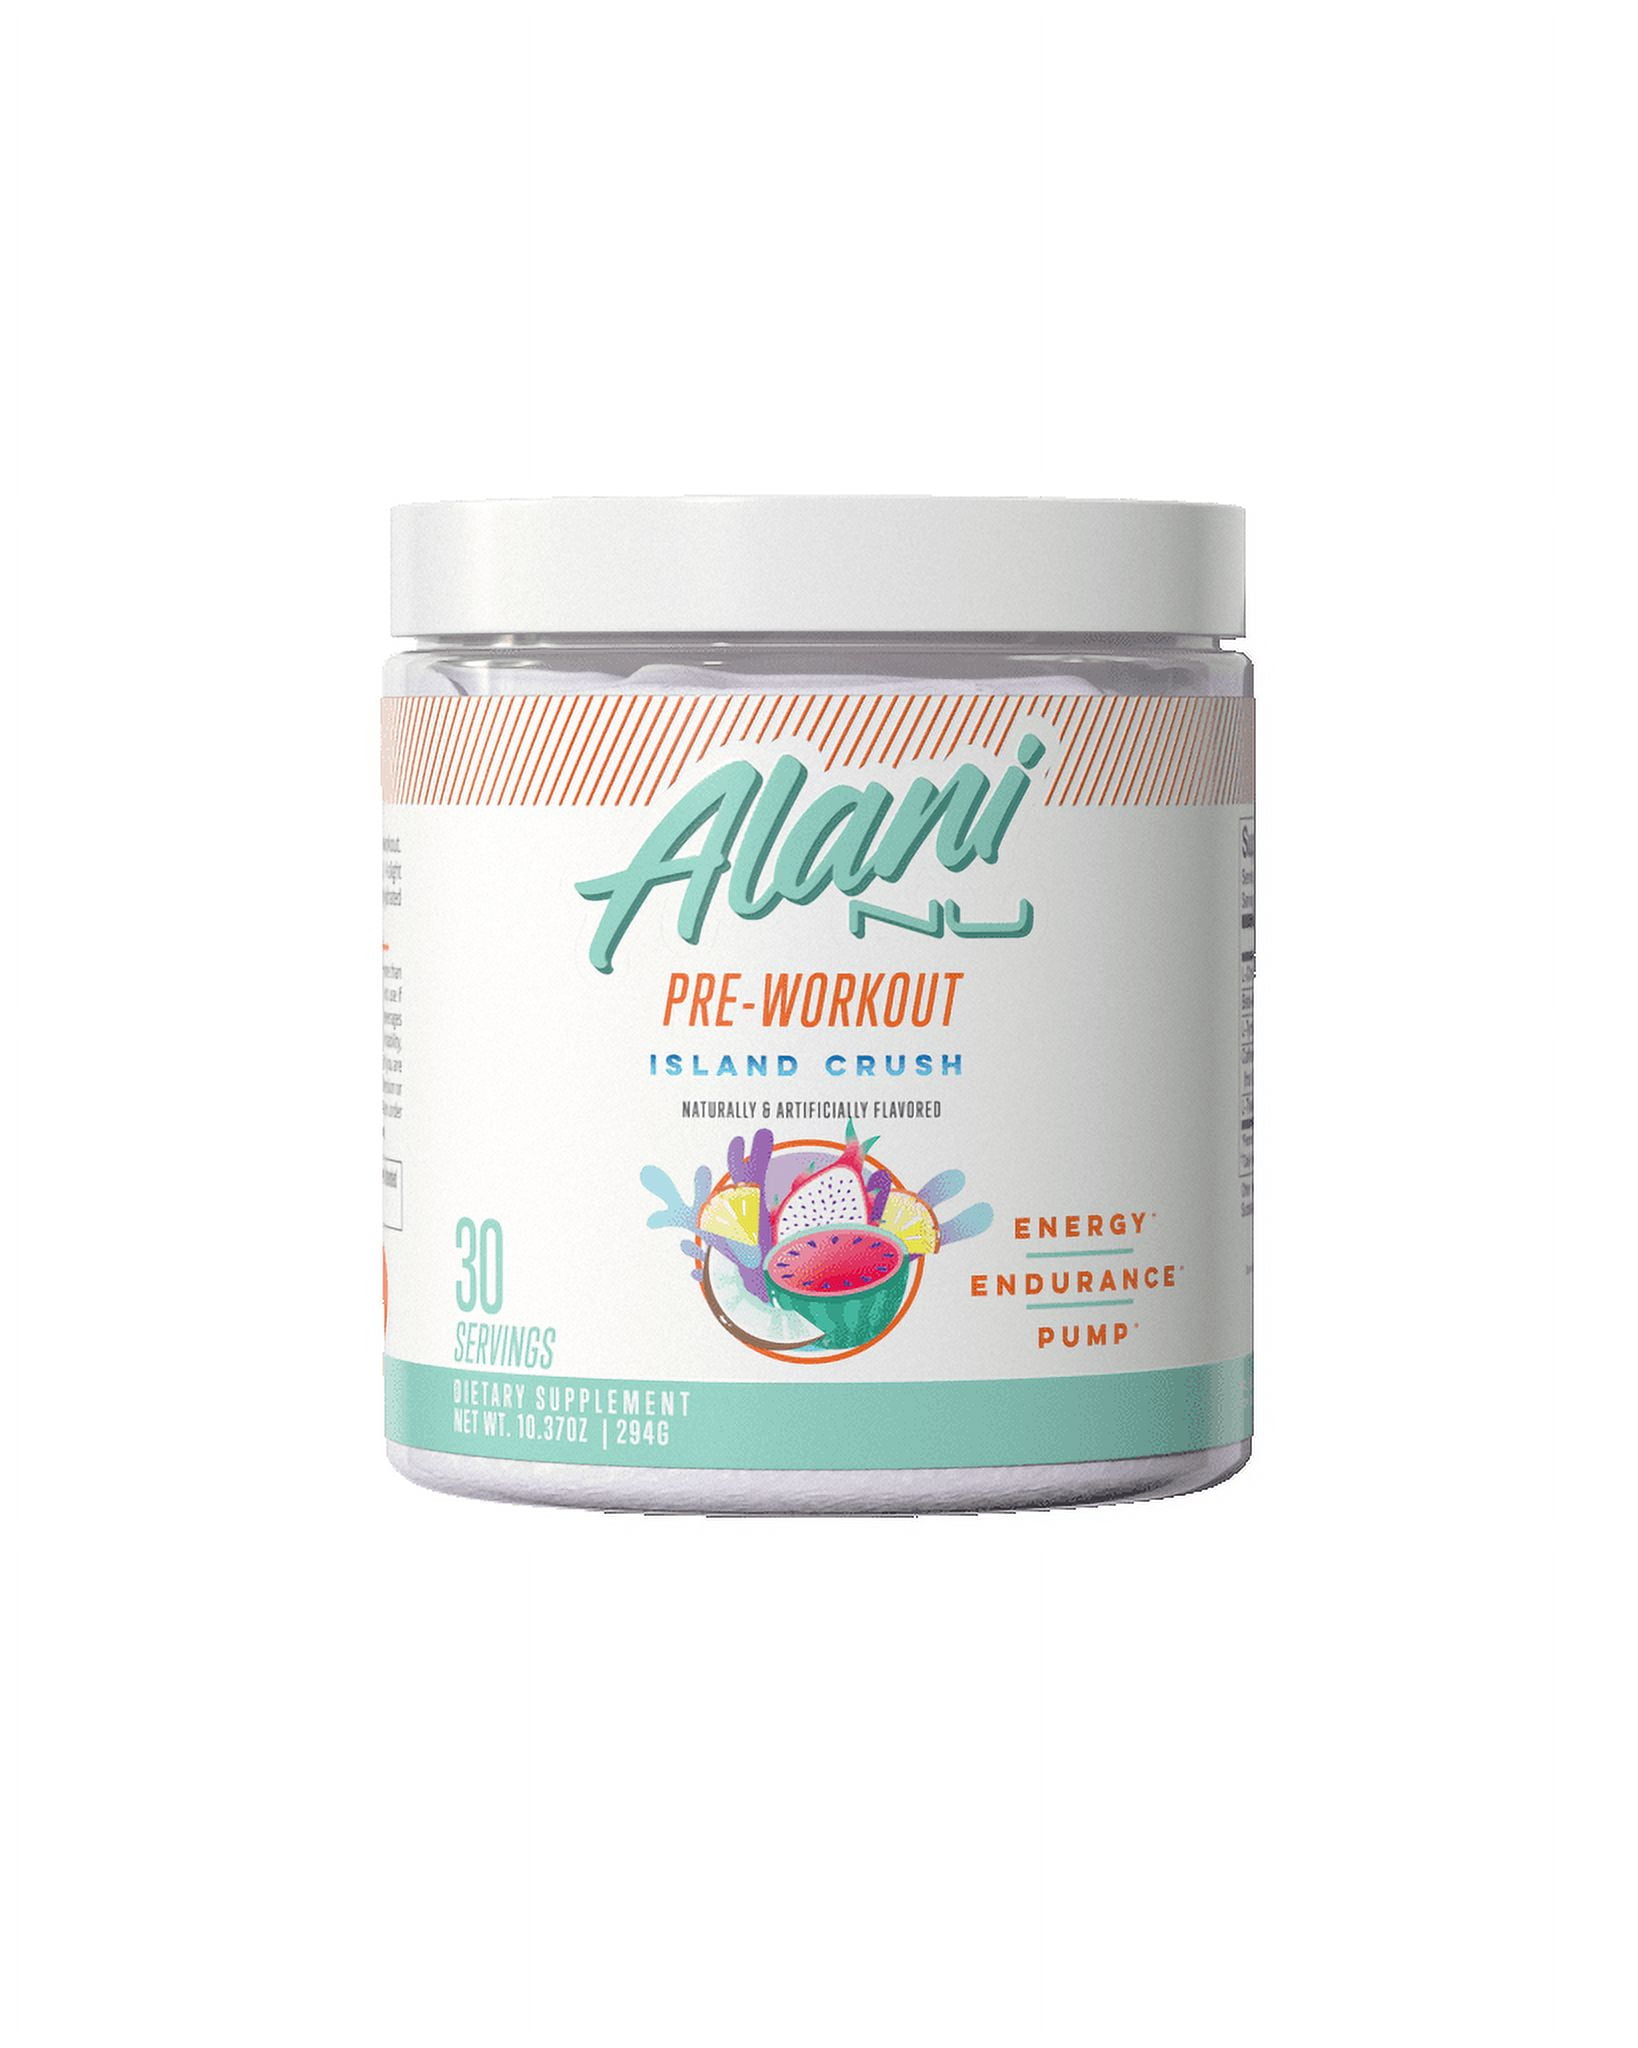 One Sol Pre-Workout Review - I Try the Alani Nu Copycat